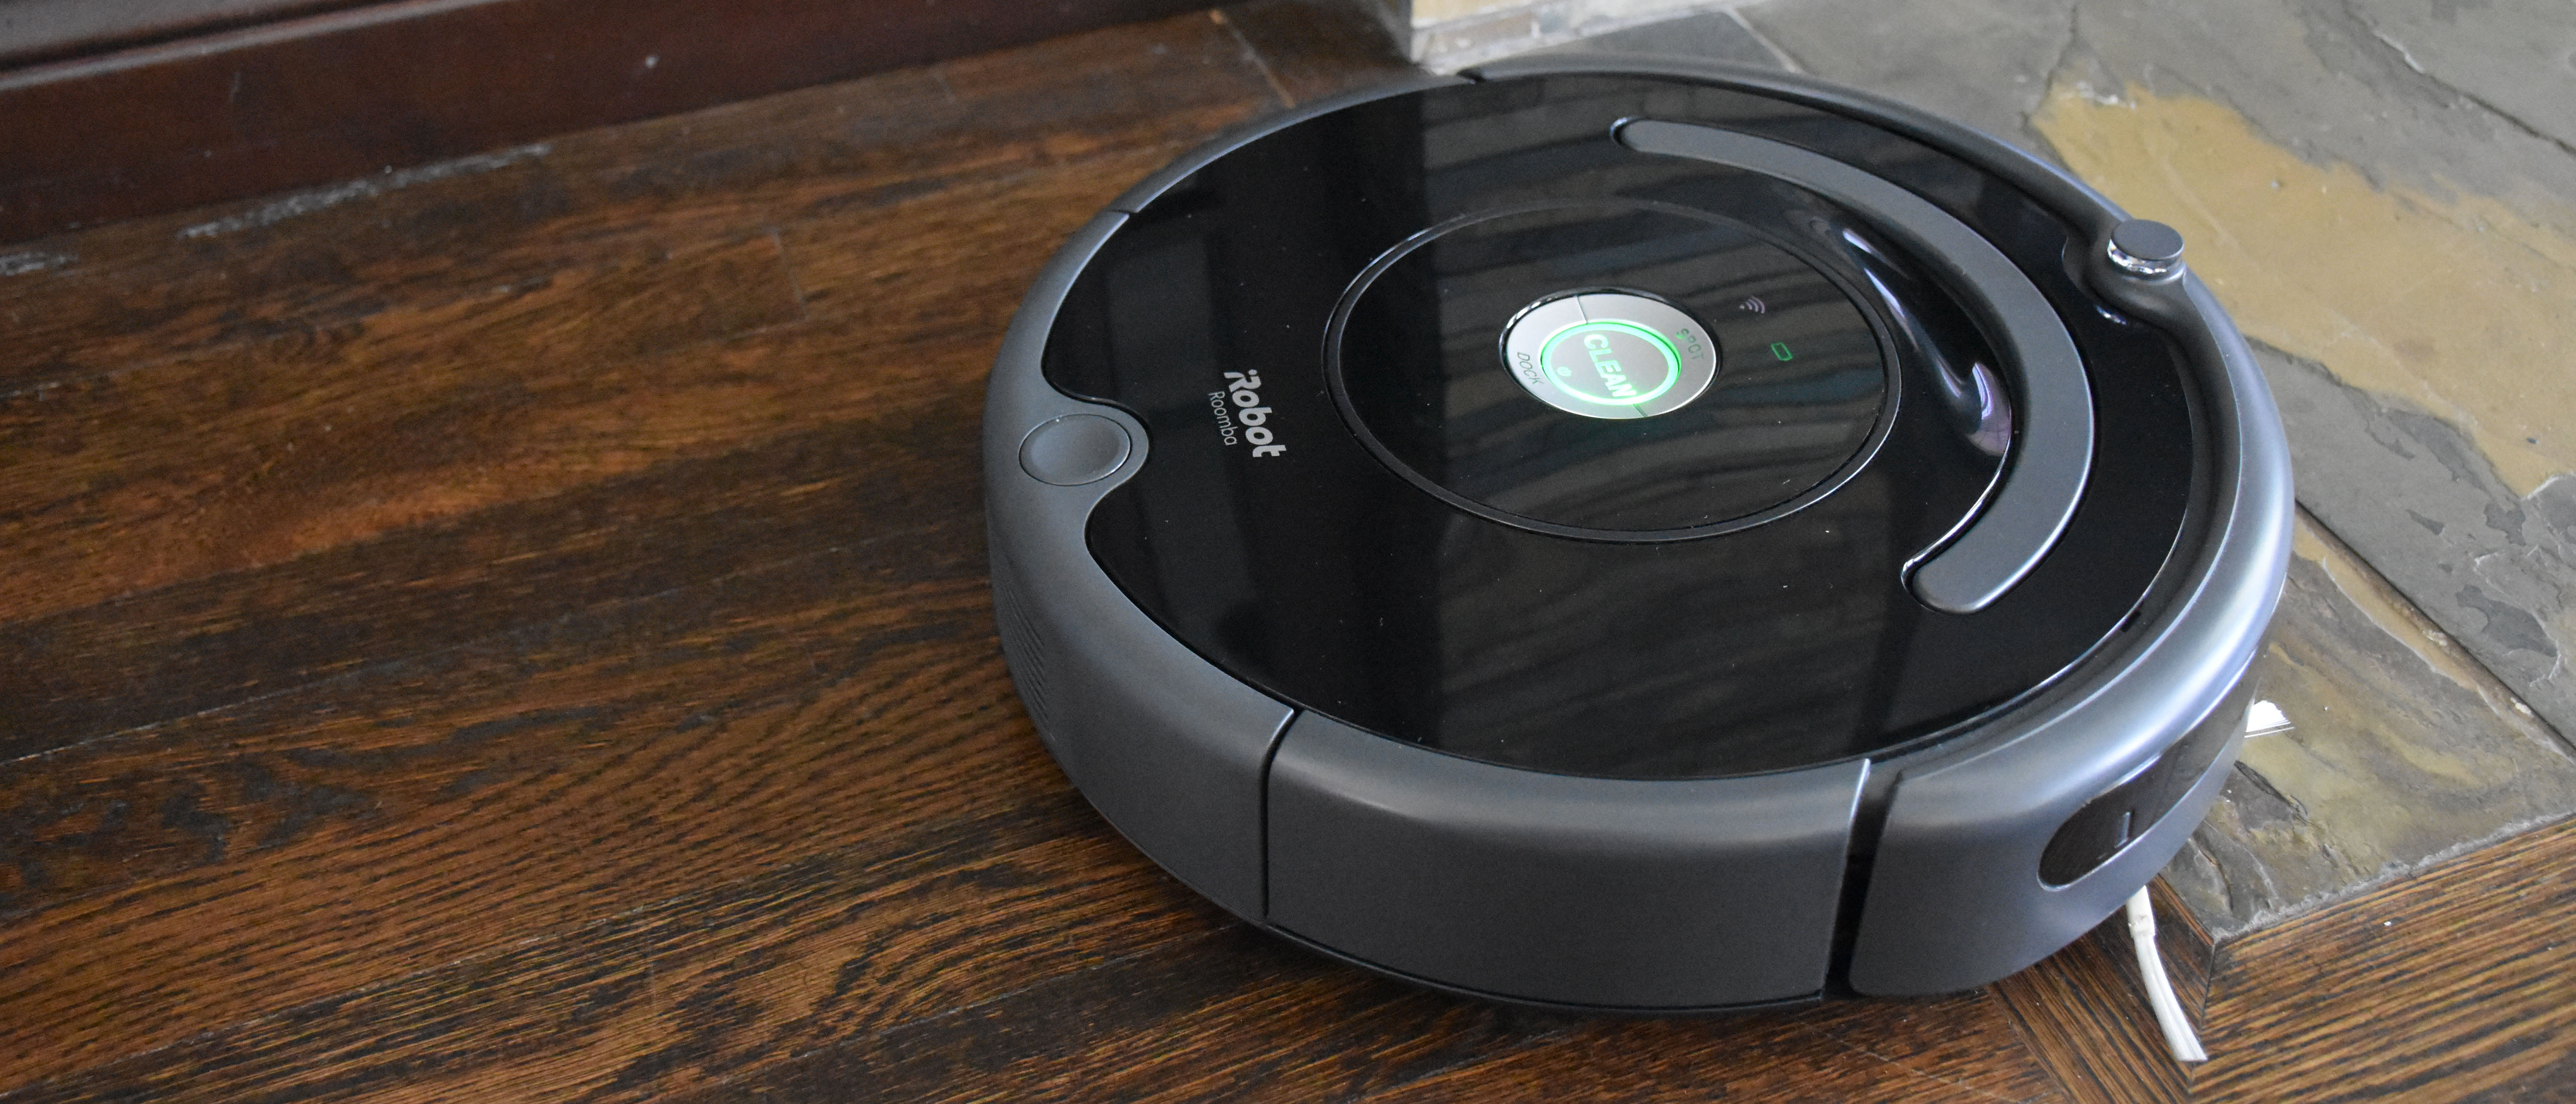  iRobot Roomba 675 Robot Vacuum-Wi-Fi Connectivity, Works with  Alexa, Good for Pet Hair, Carpets, Hard Floors, Self-Charging